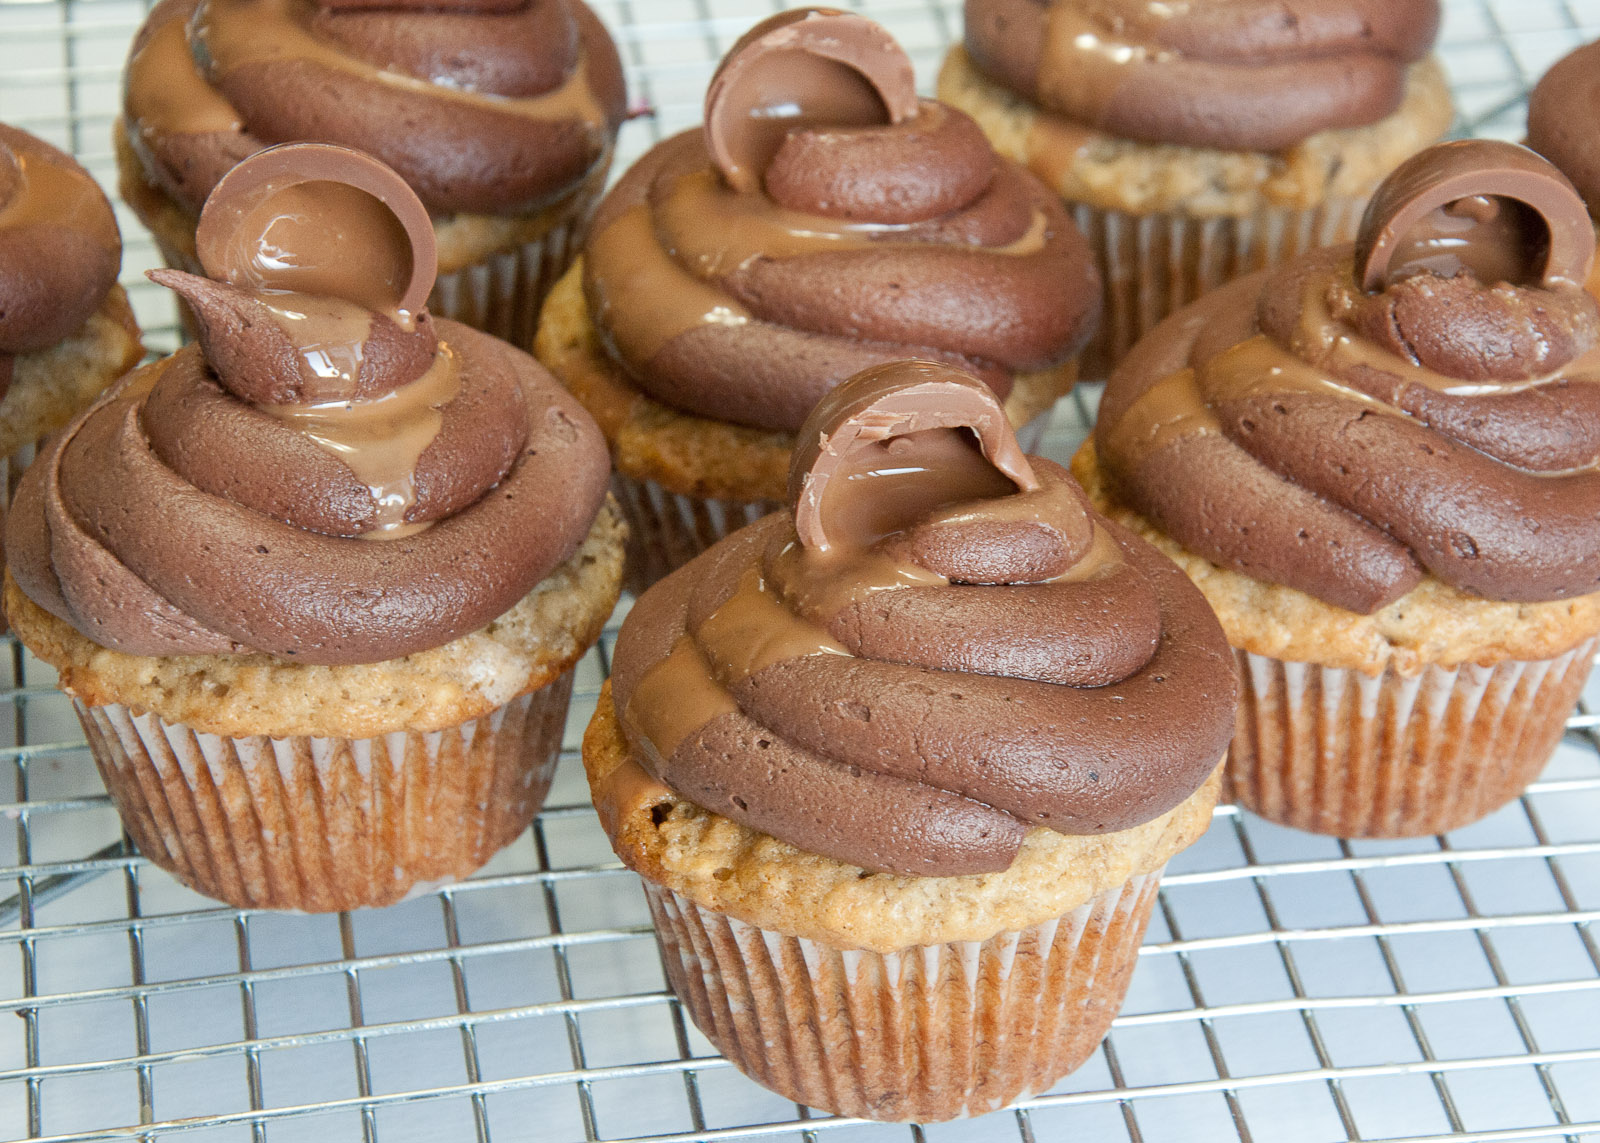 Chocolate Peanut Butter and Banana Cupcakes